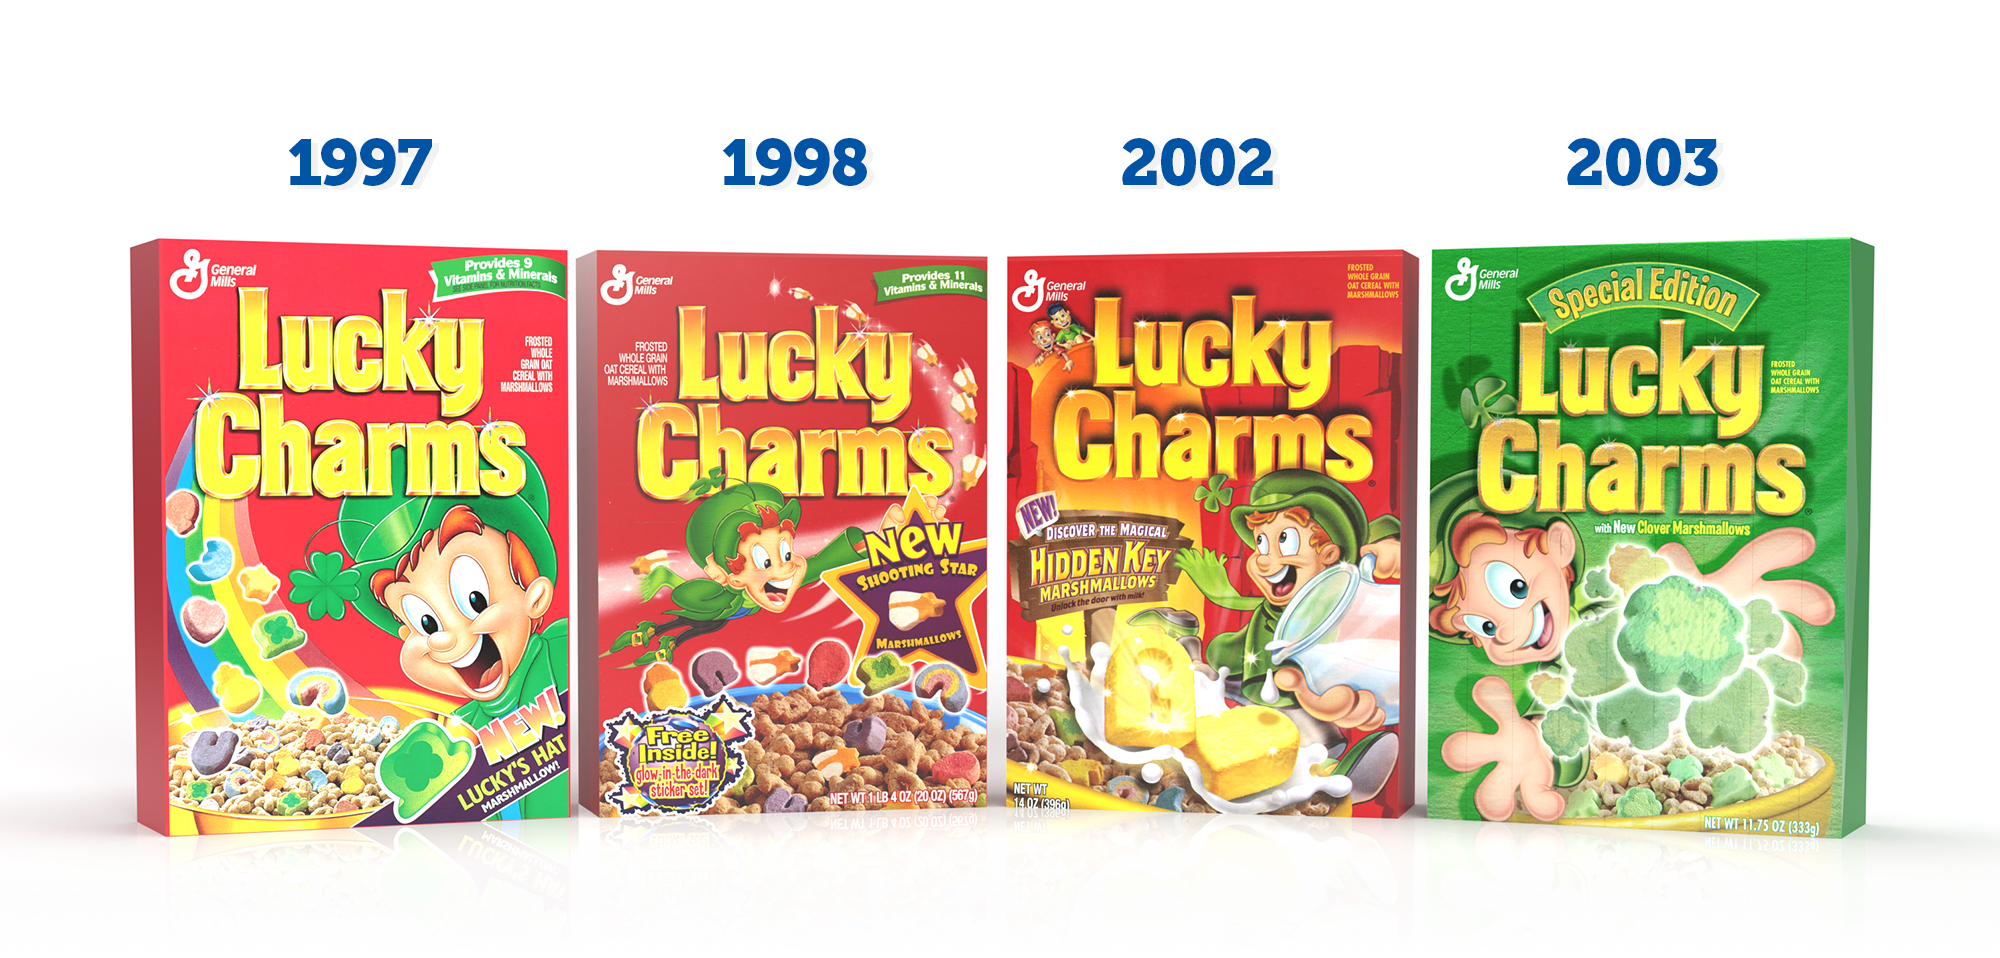 Lucky Charms boxes from 1997 to 2003